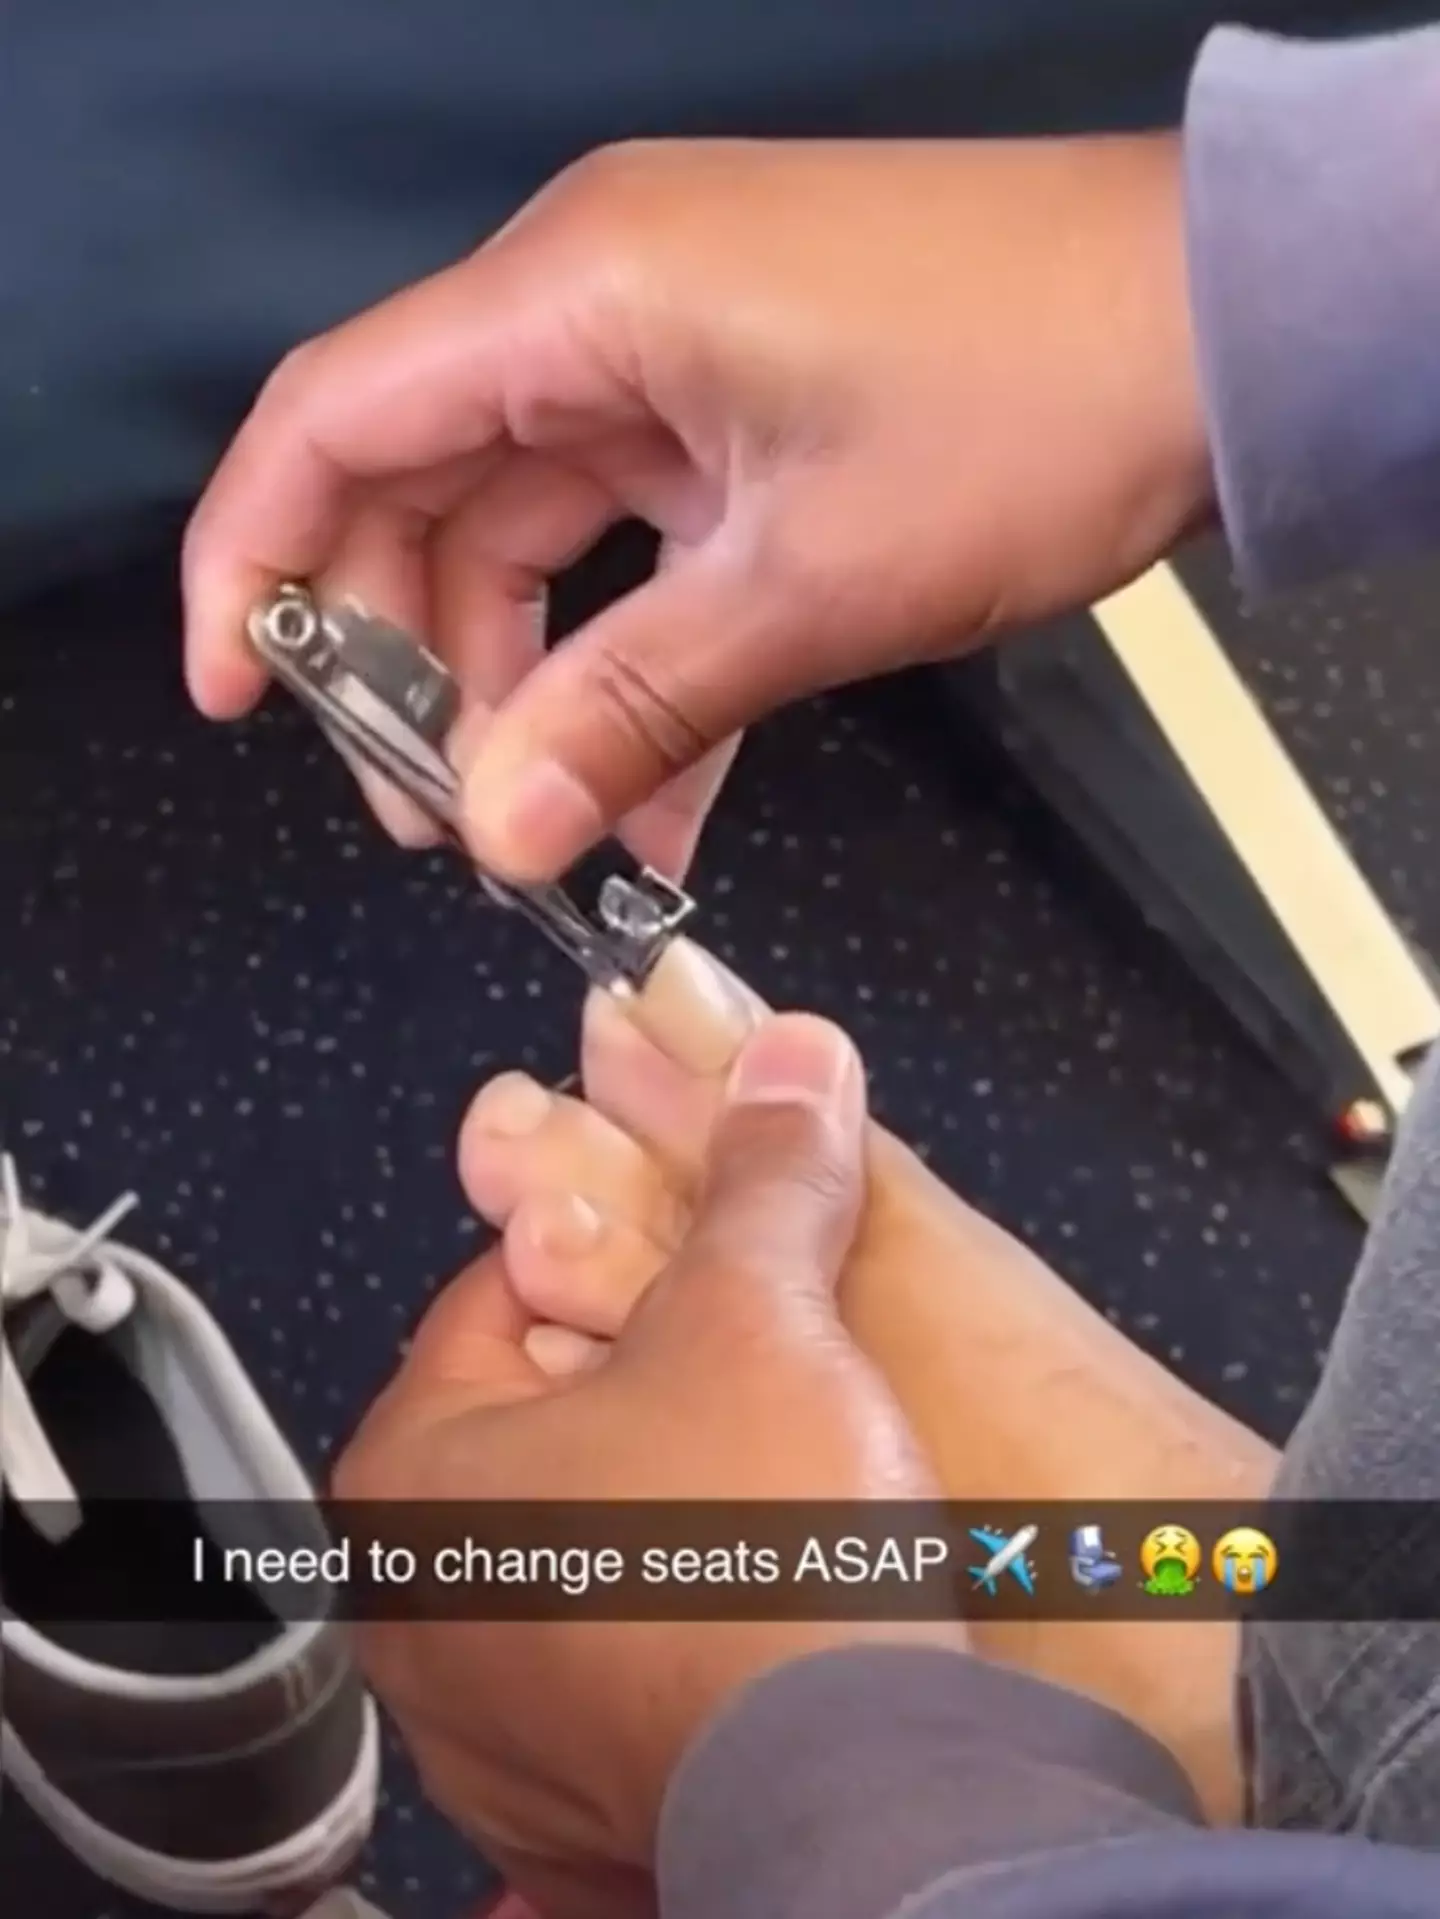 The passenger got rid of his nail trimmings by throwing them on the floor.